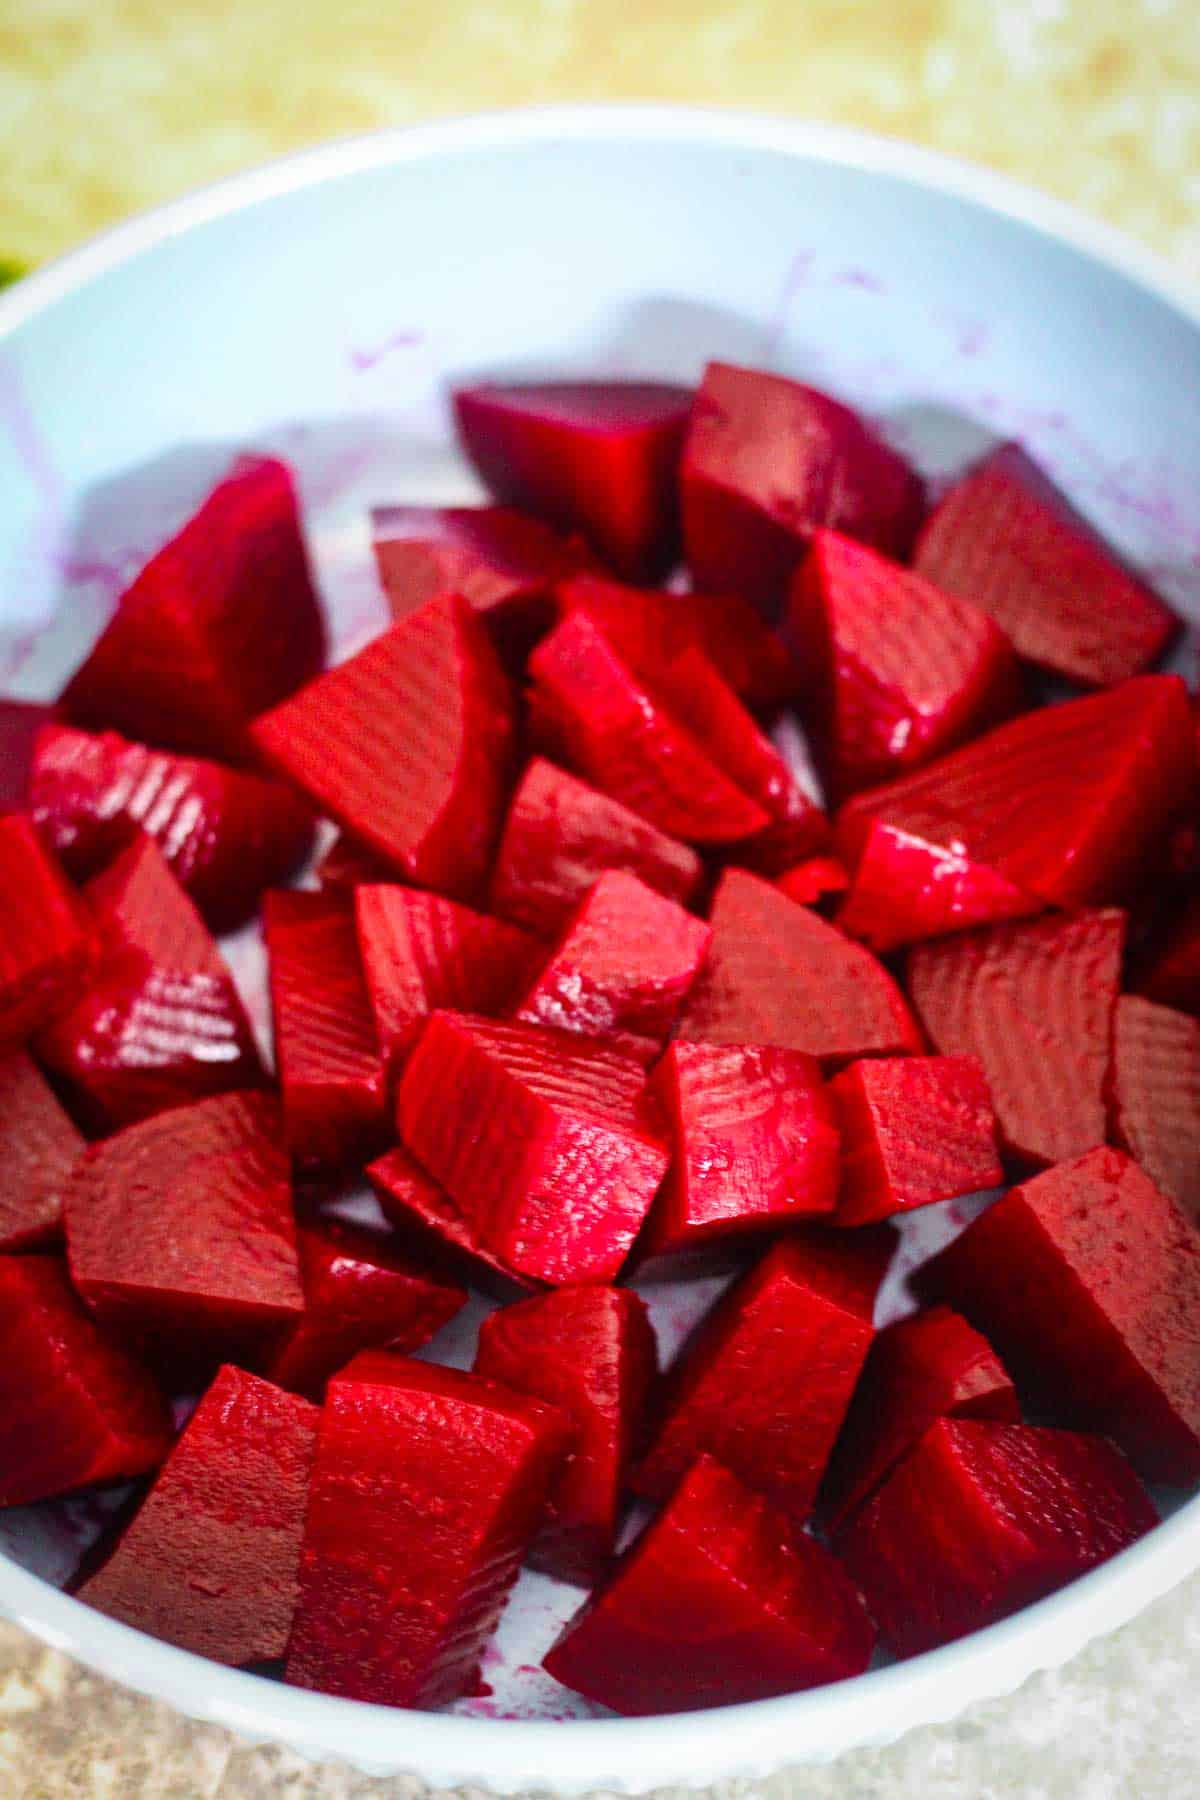 Cooked beets, cut in cube shape.